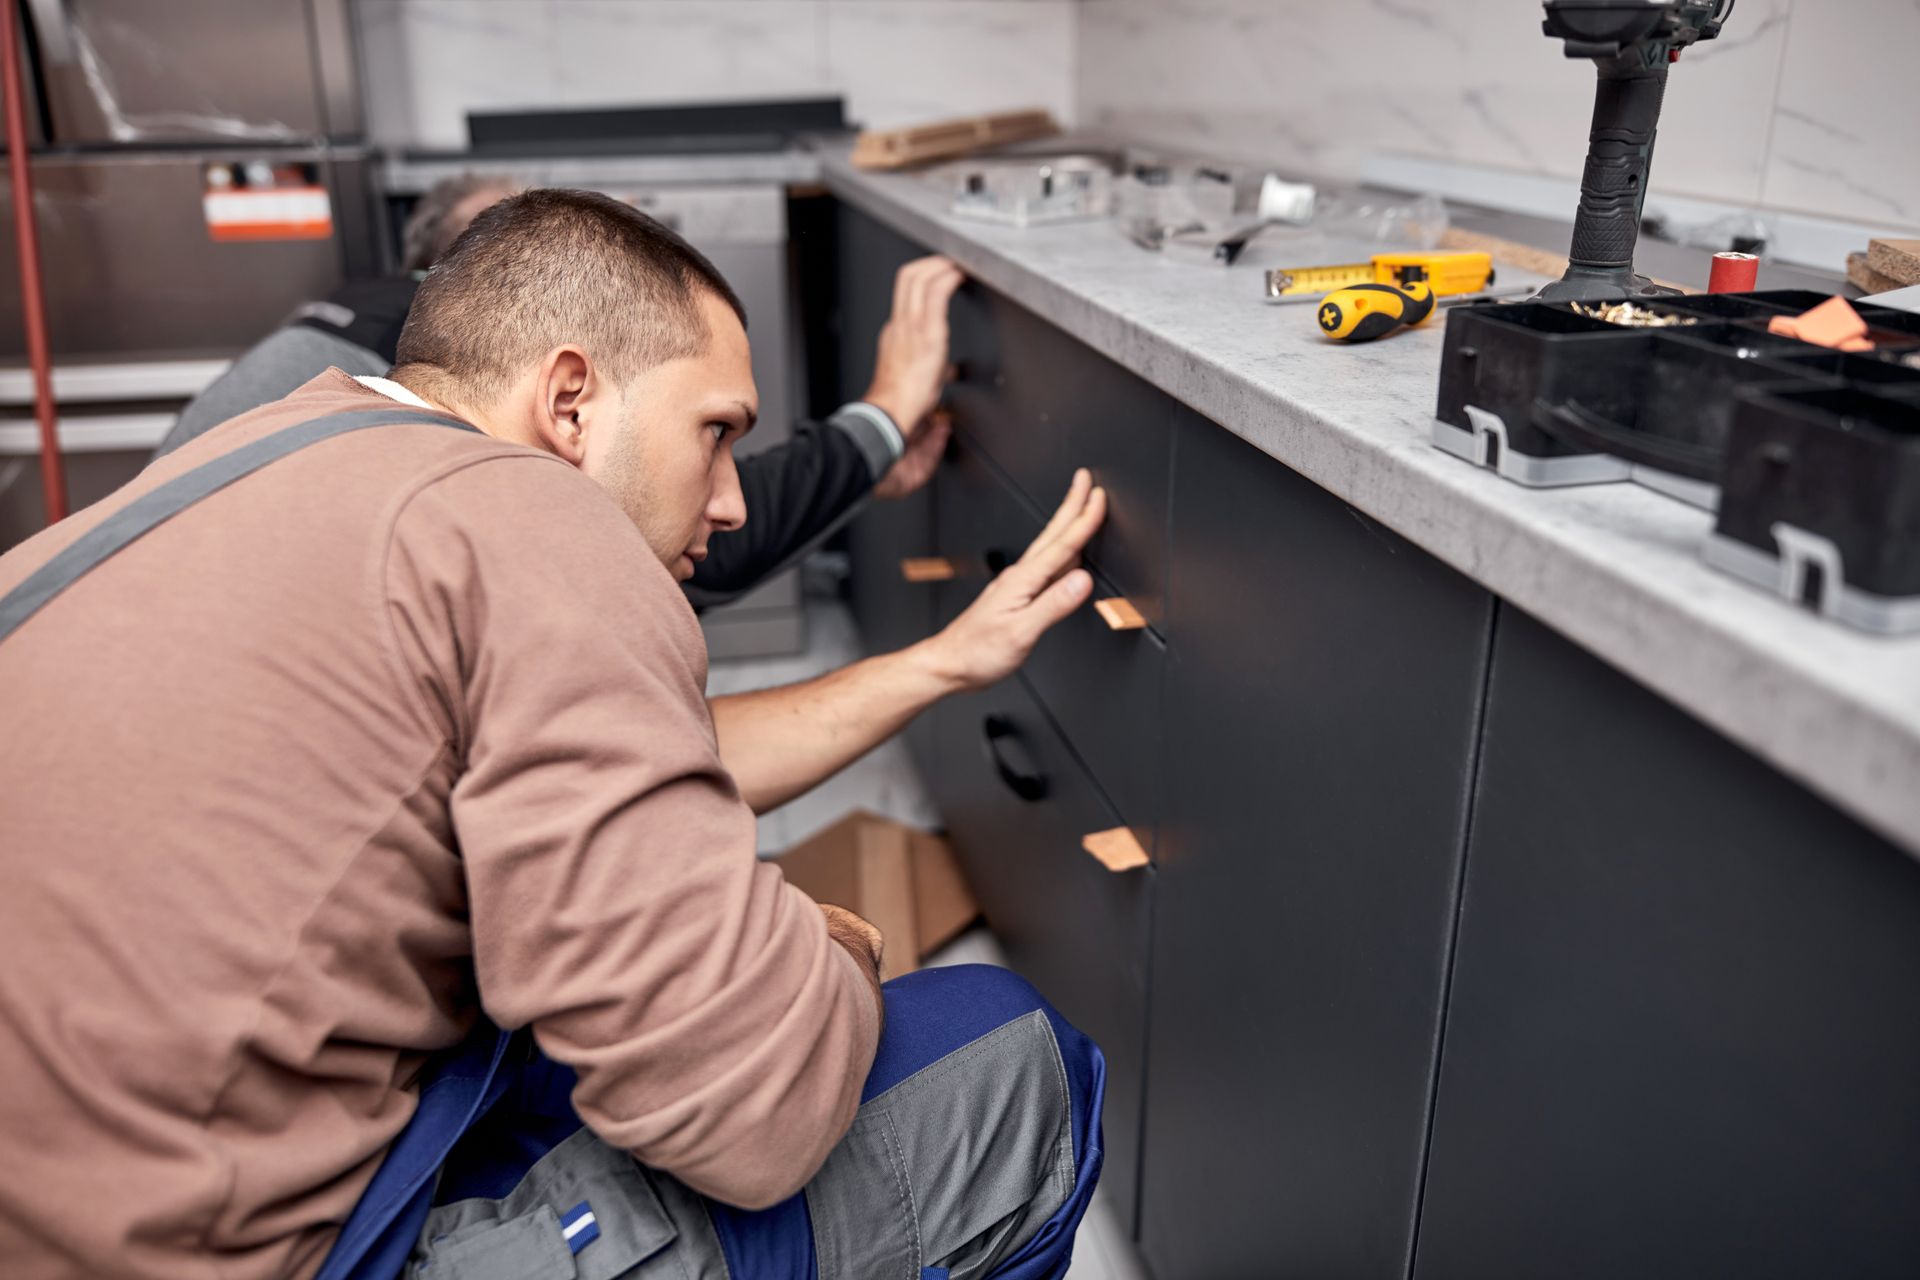 Two workers working on cabinets